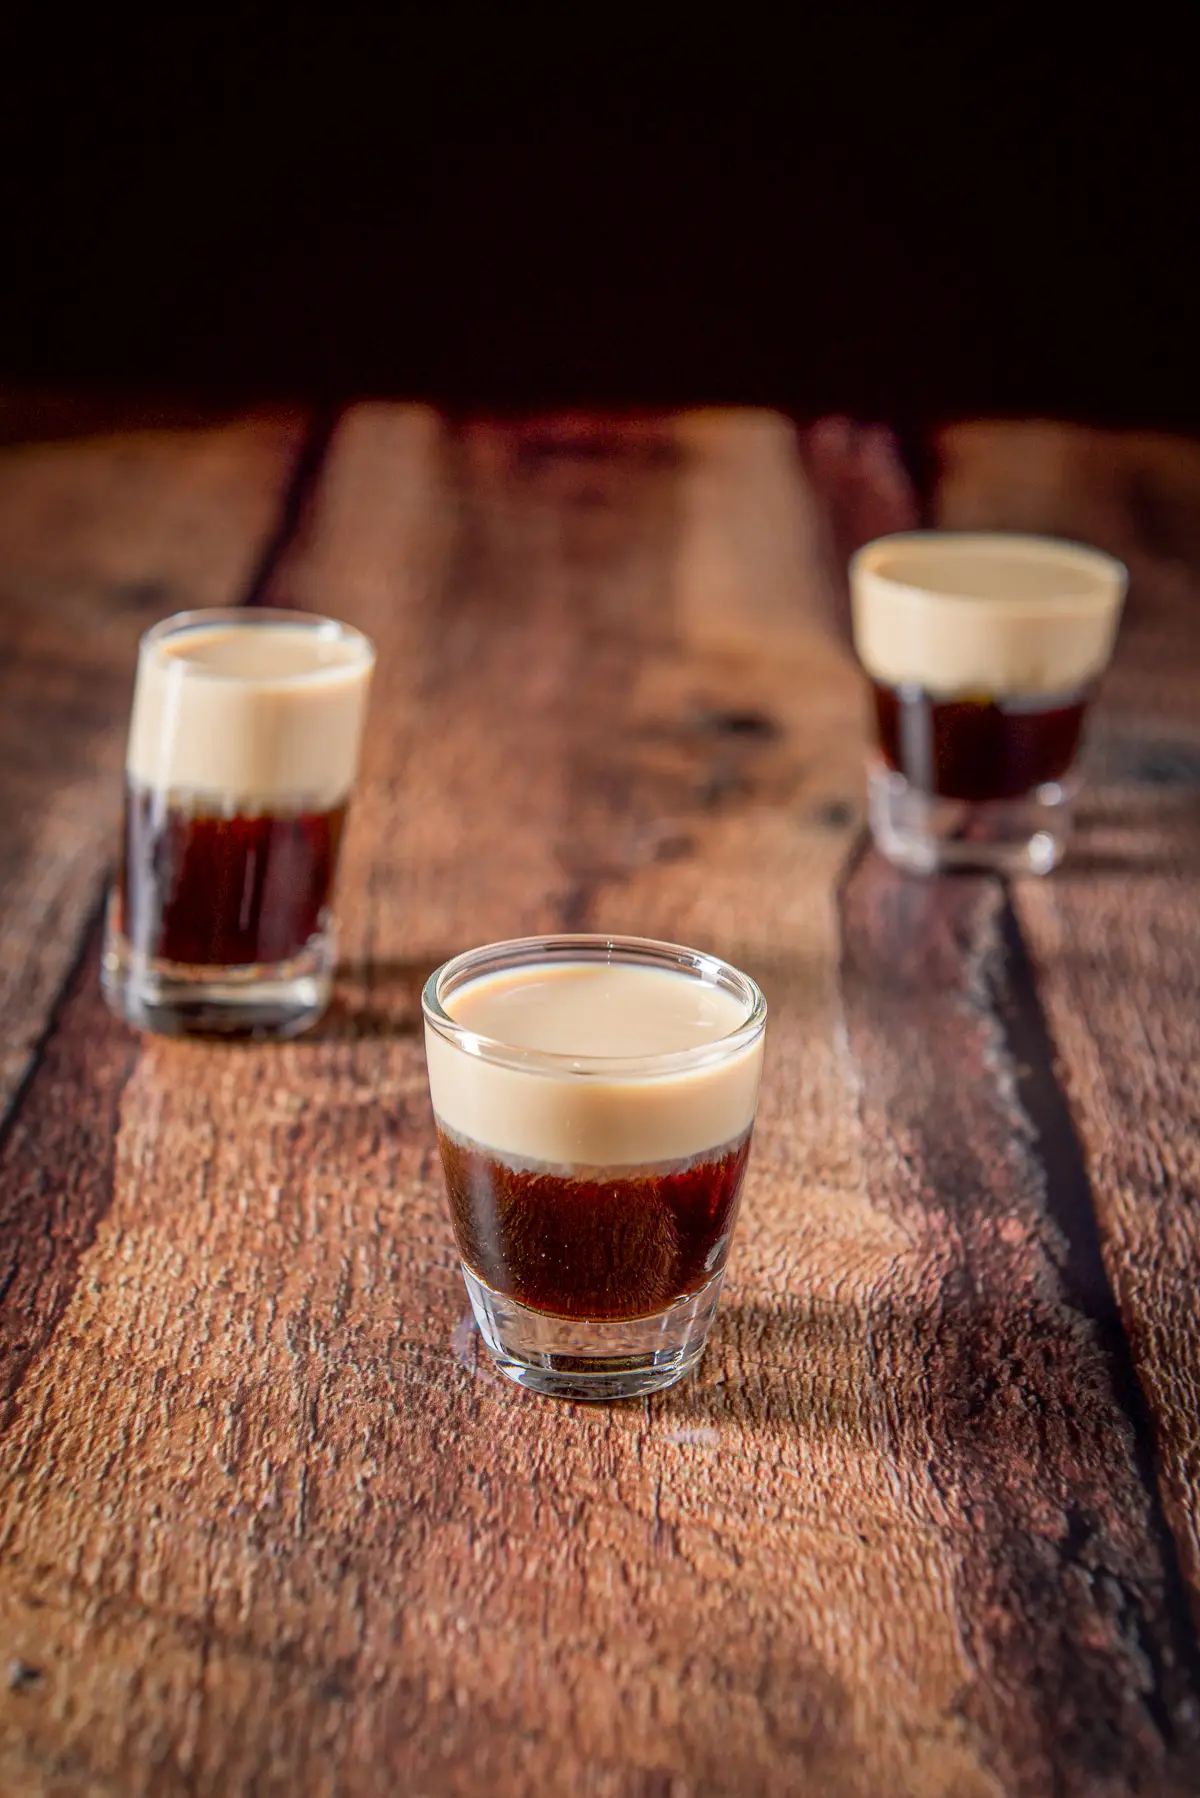 Three glasses filled with a layered shot all on a wooden table